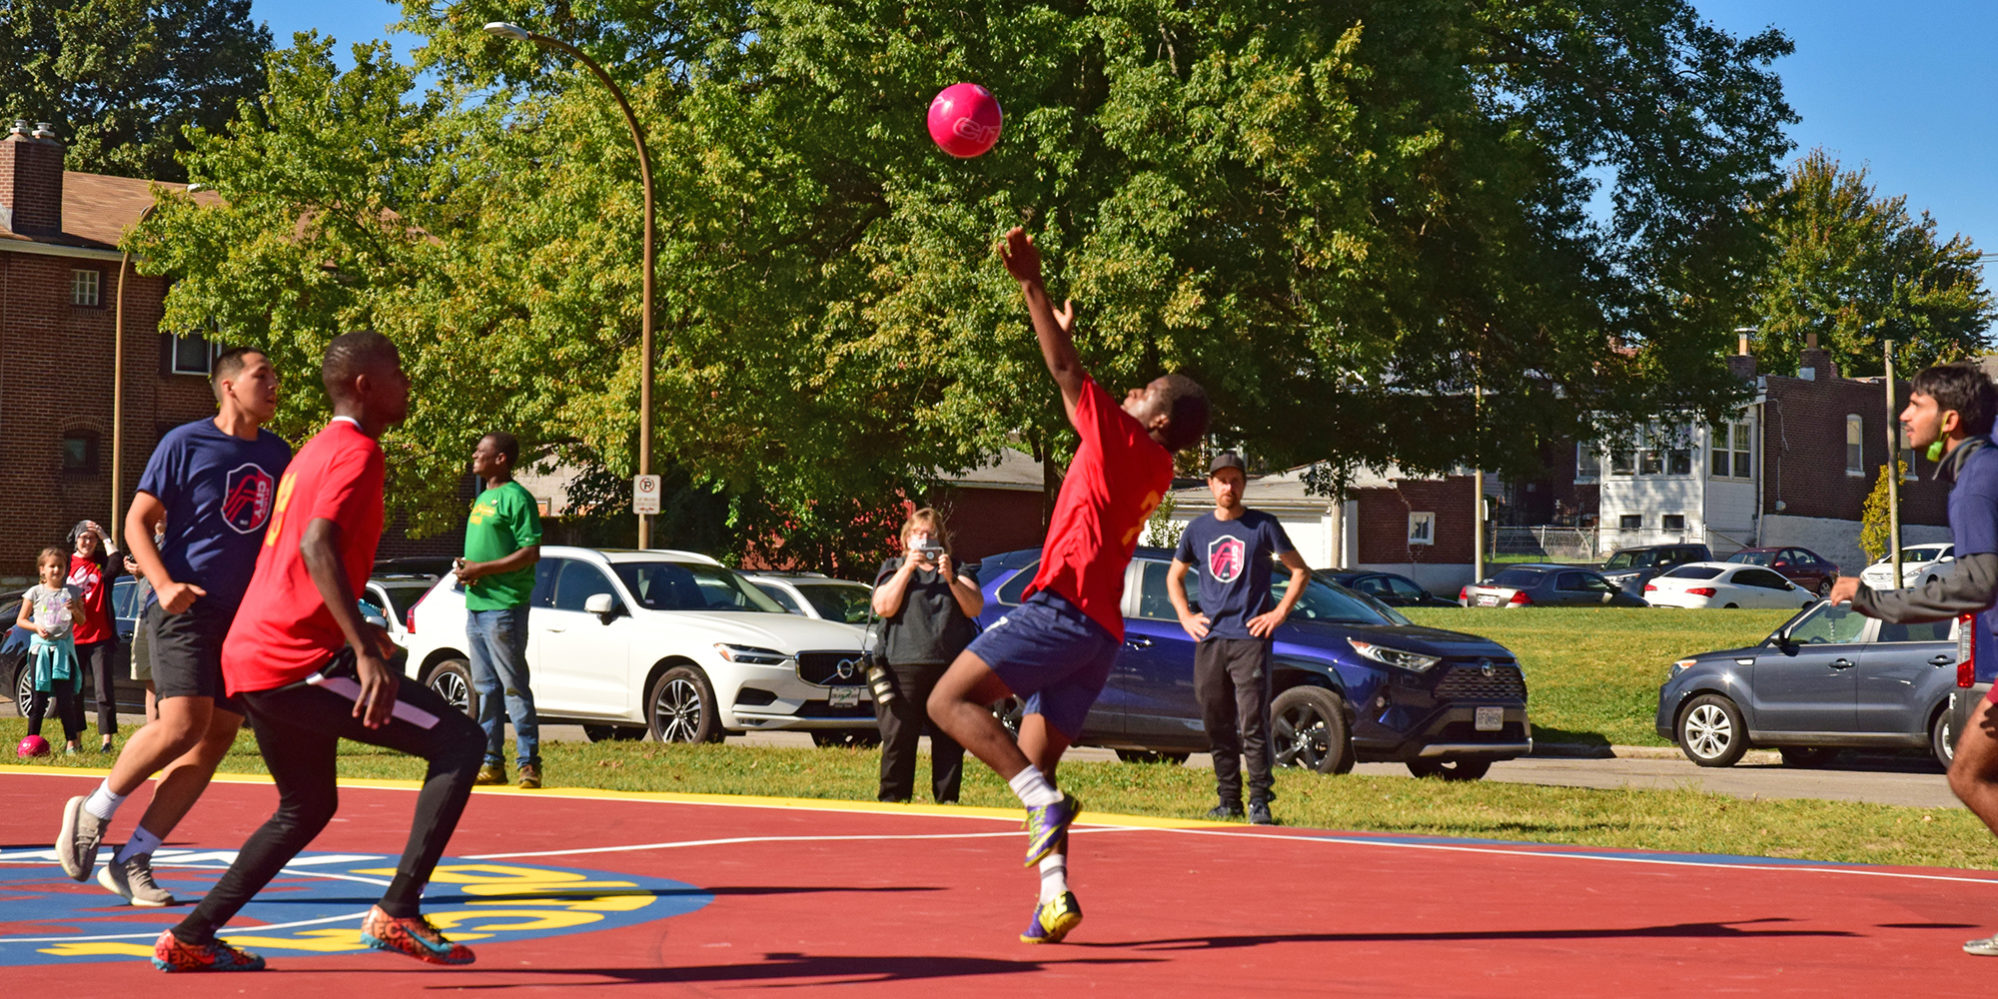 Young people play futsal on the court at Marquette Park in Dutchtown, St. Louis, MO.